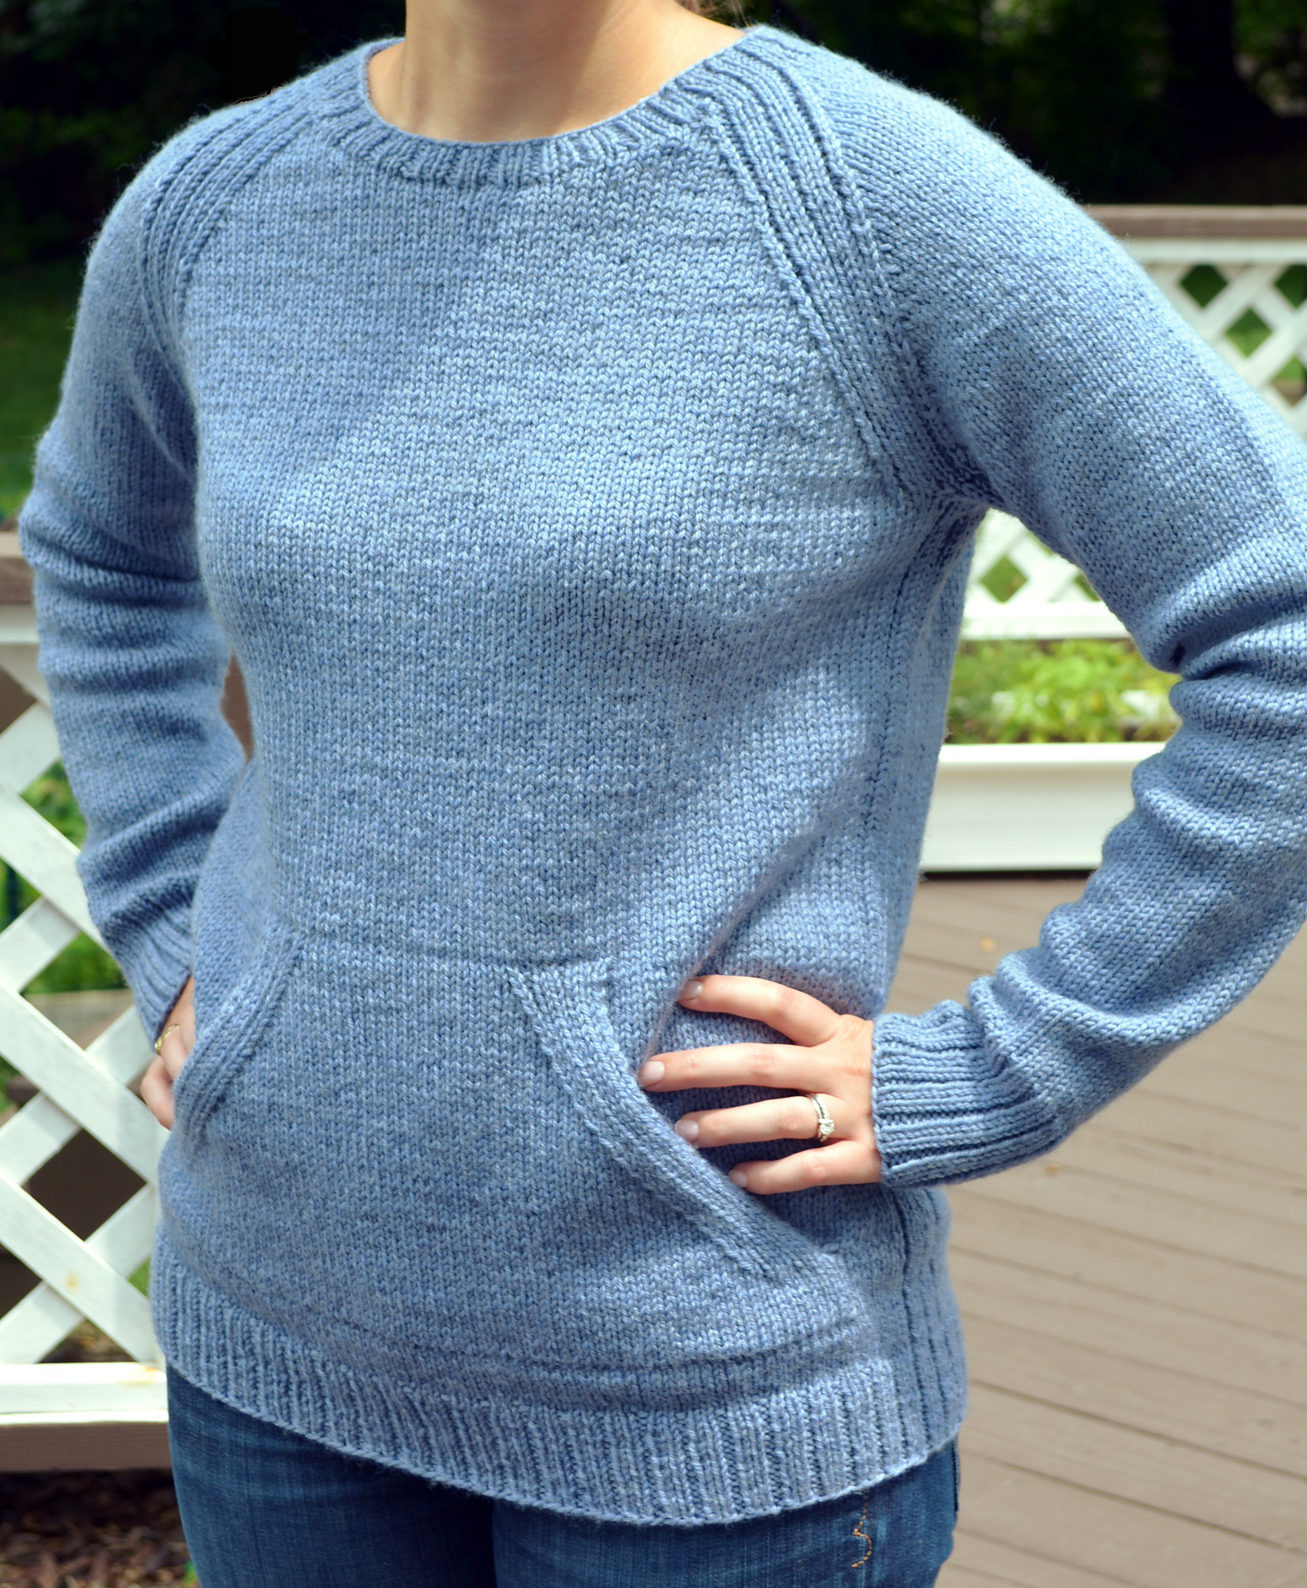 Long Sleeve Pullover Sweater Knitting Patterns | In the ...